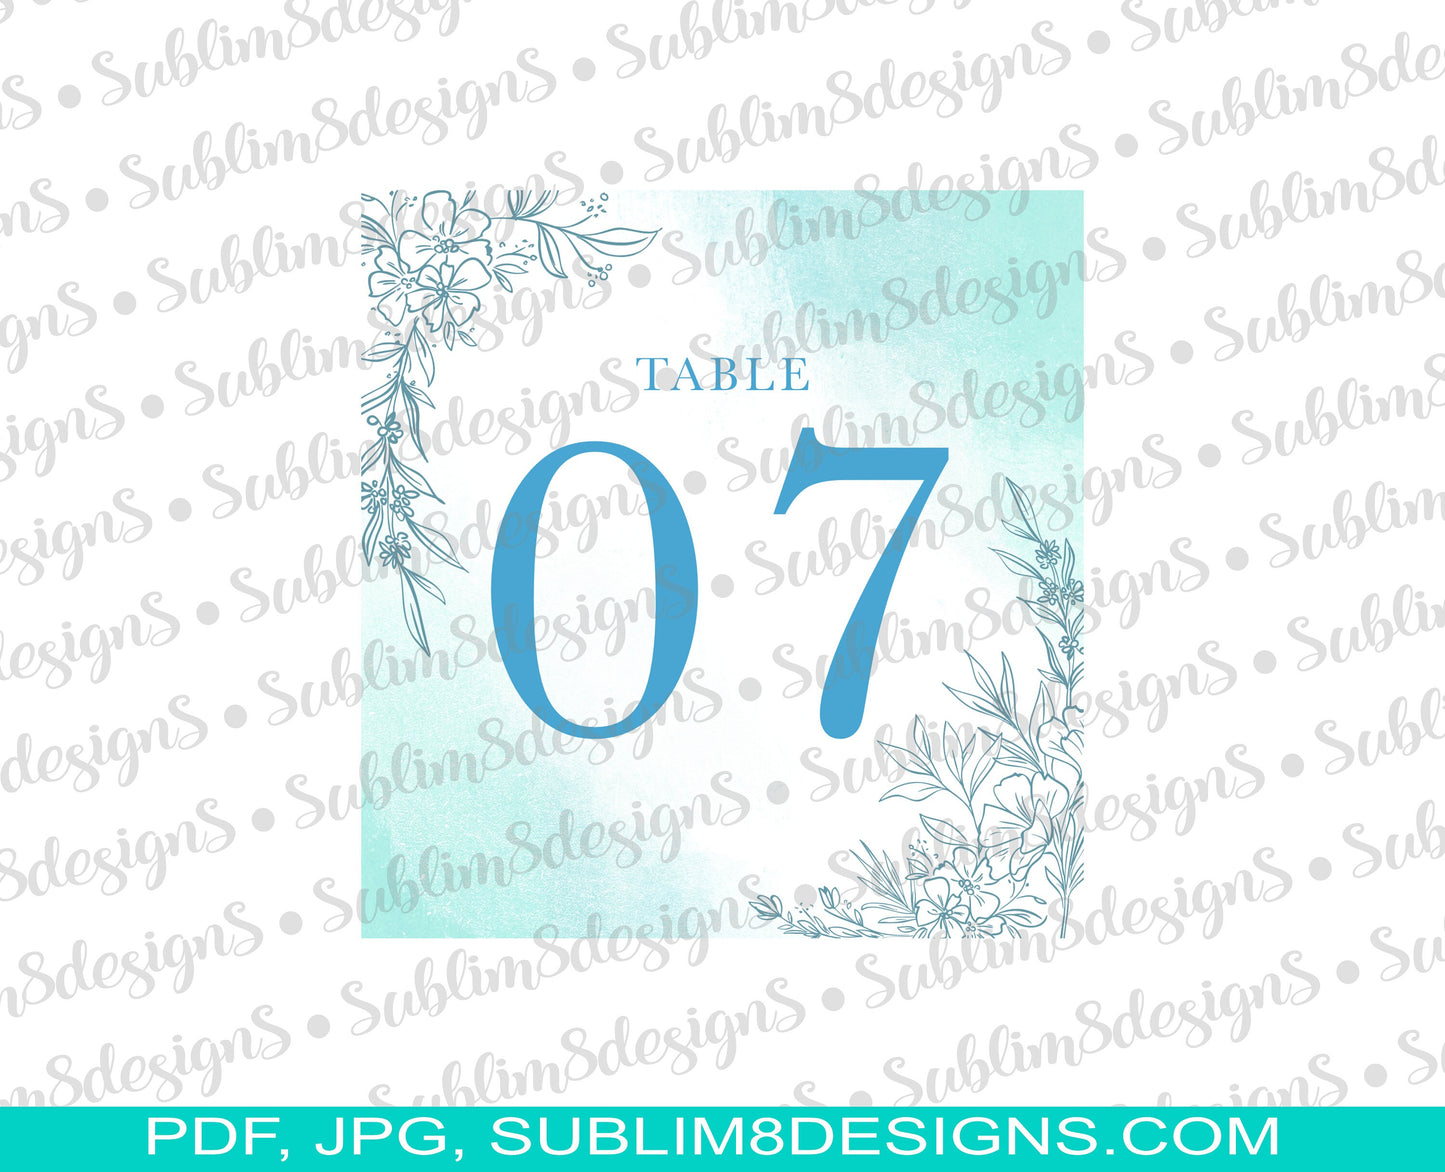 Teal Watercolor Wedding Invitation, RSVP Card, Thank you card, Table Card, Remember the Date, Digital Design PDF, PNG and Jpg